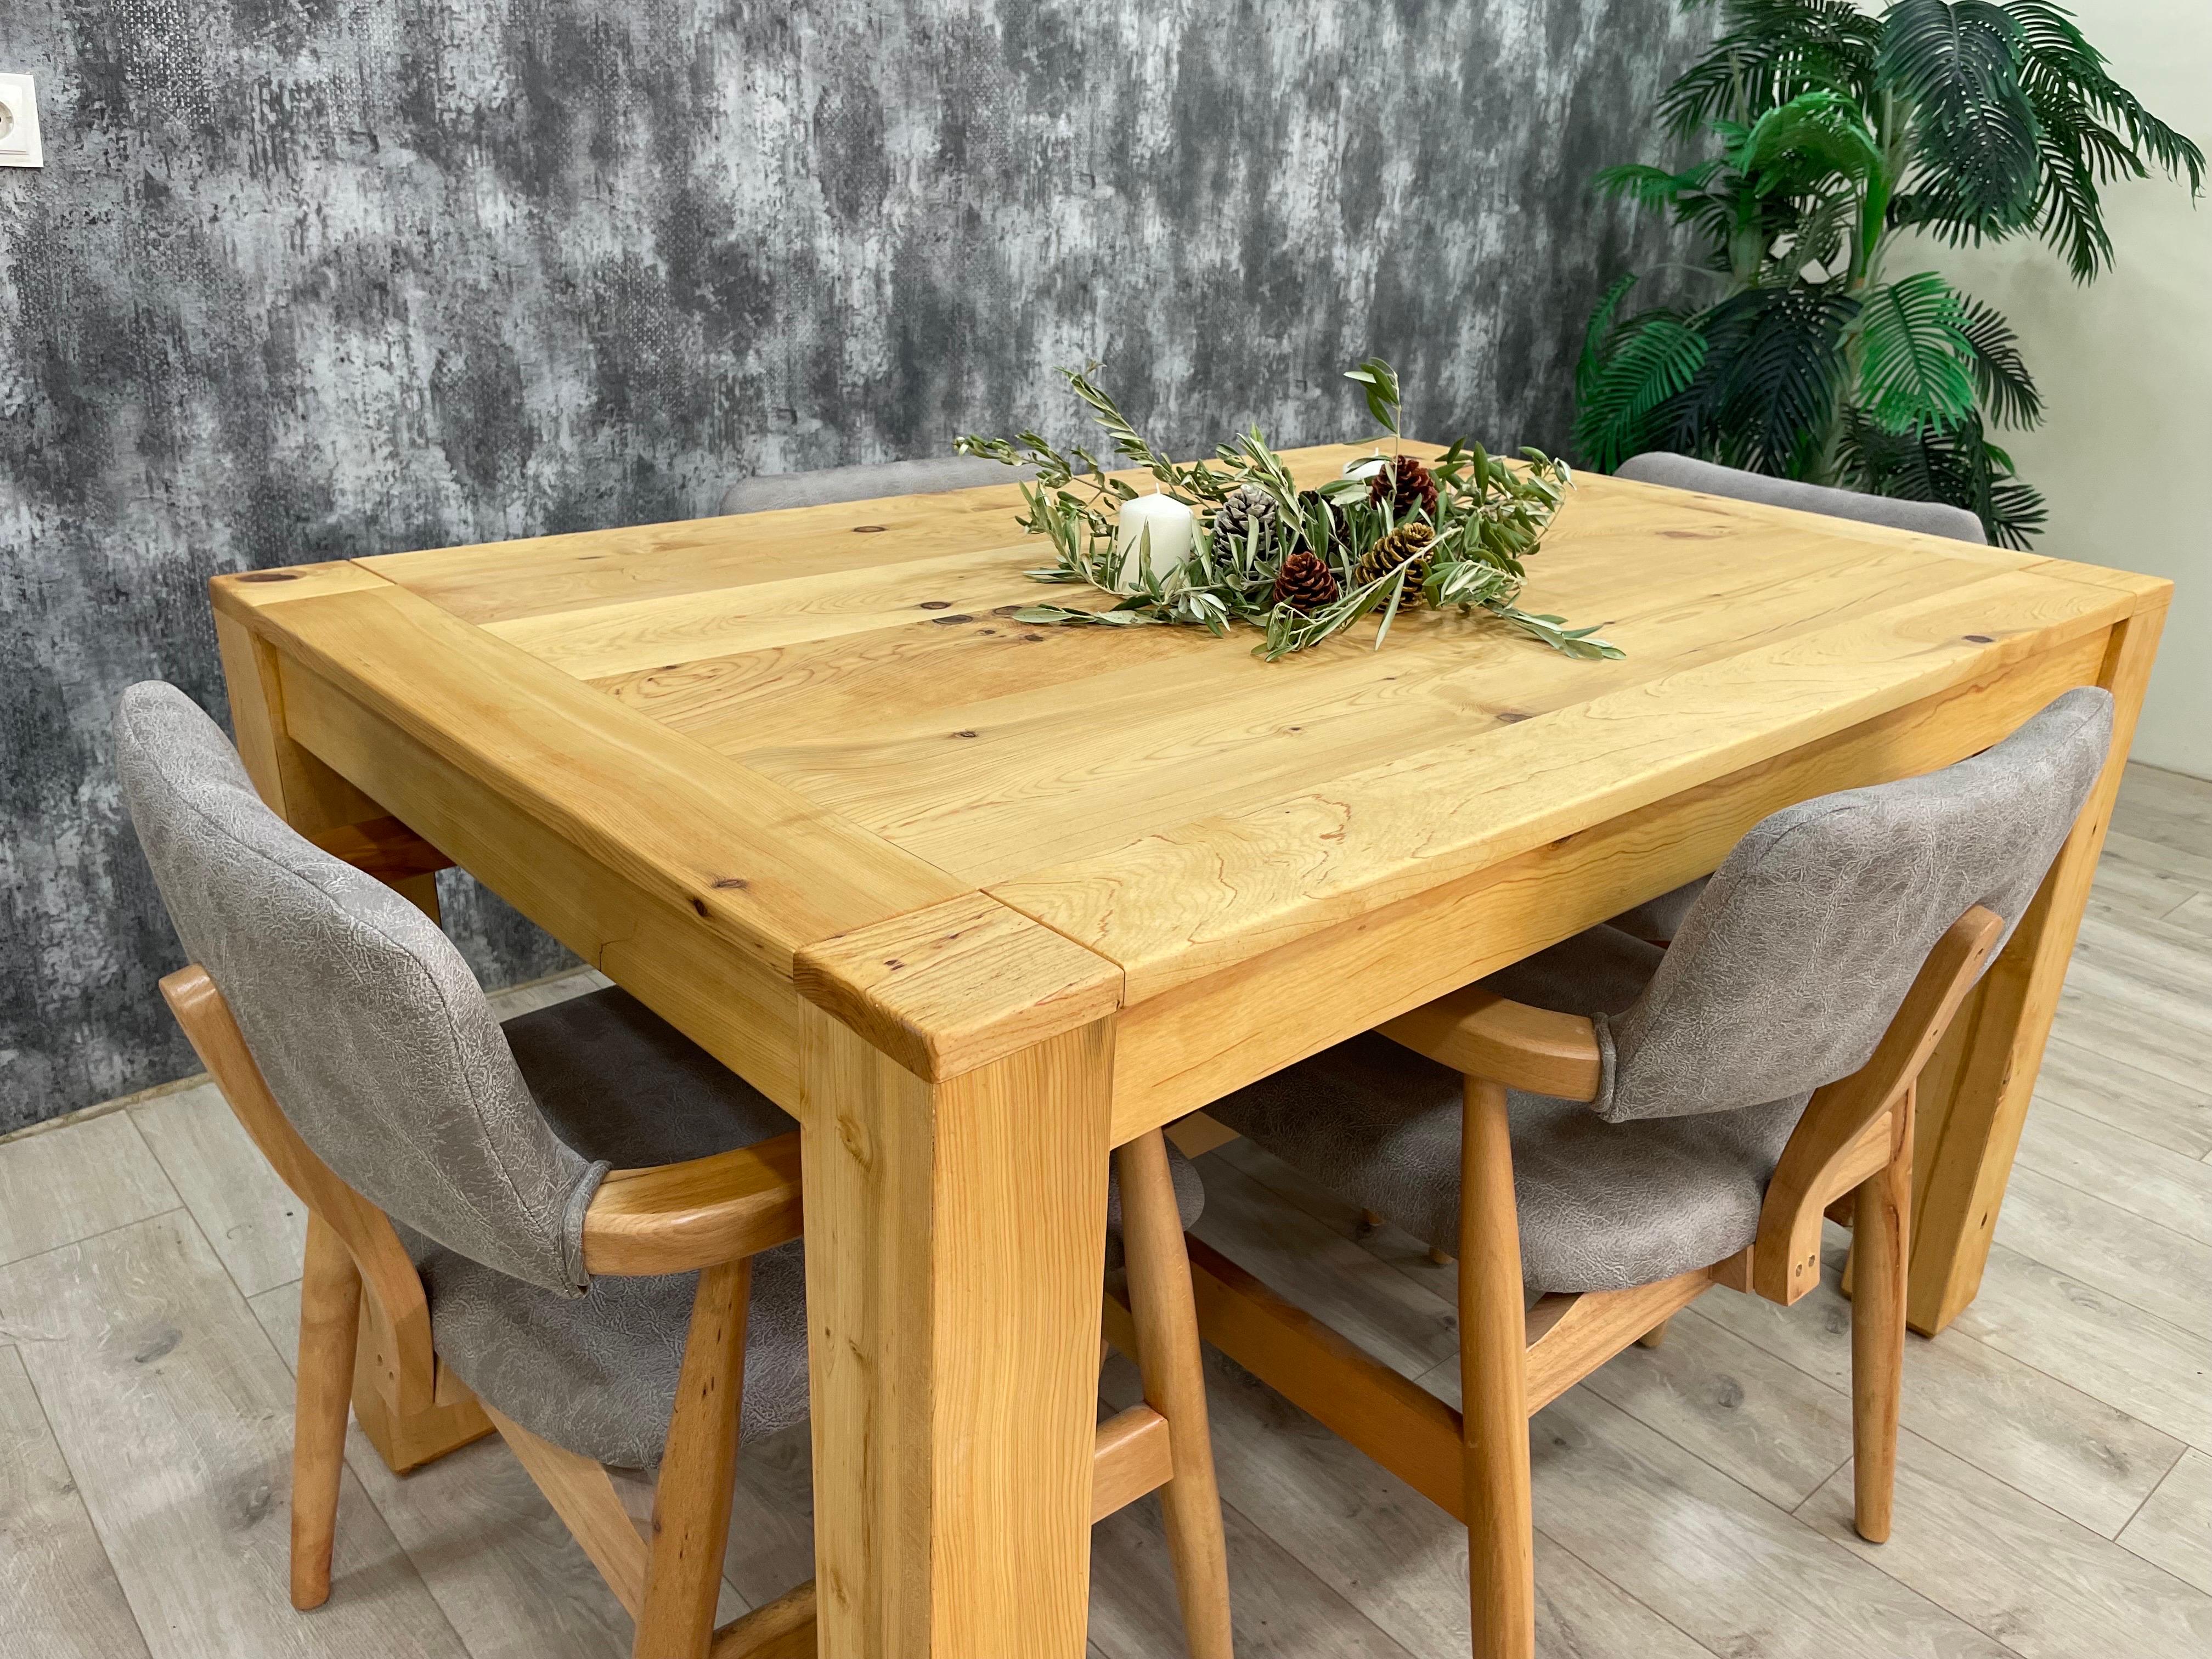 Contemporary Scandinavian Modern Style Dining Table in Solid Cedar Wood, Made to Order For Sale